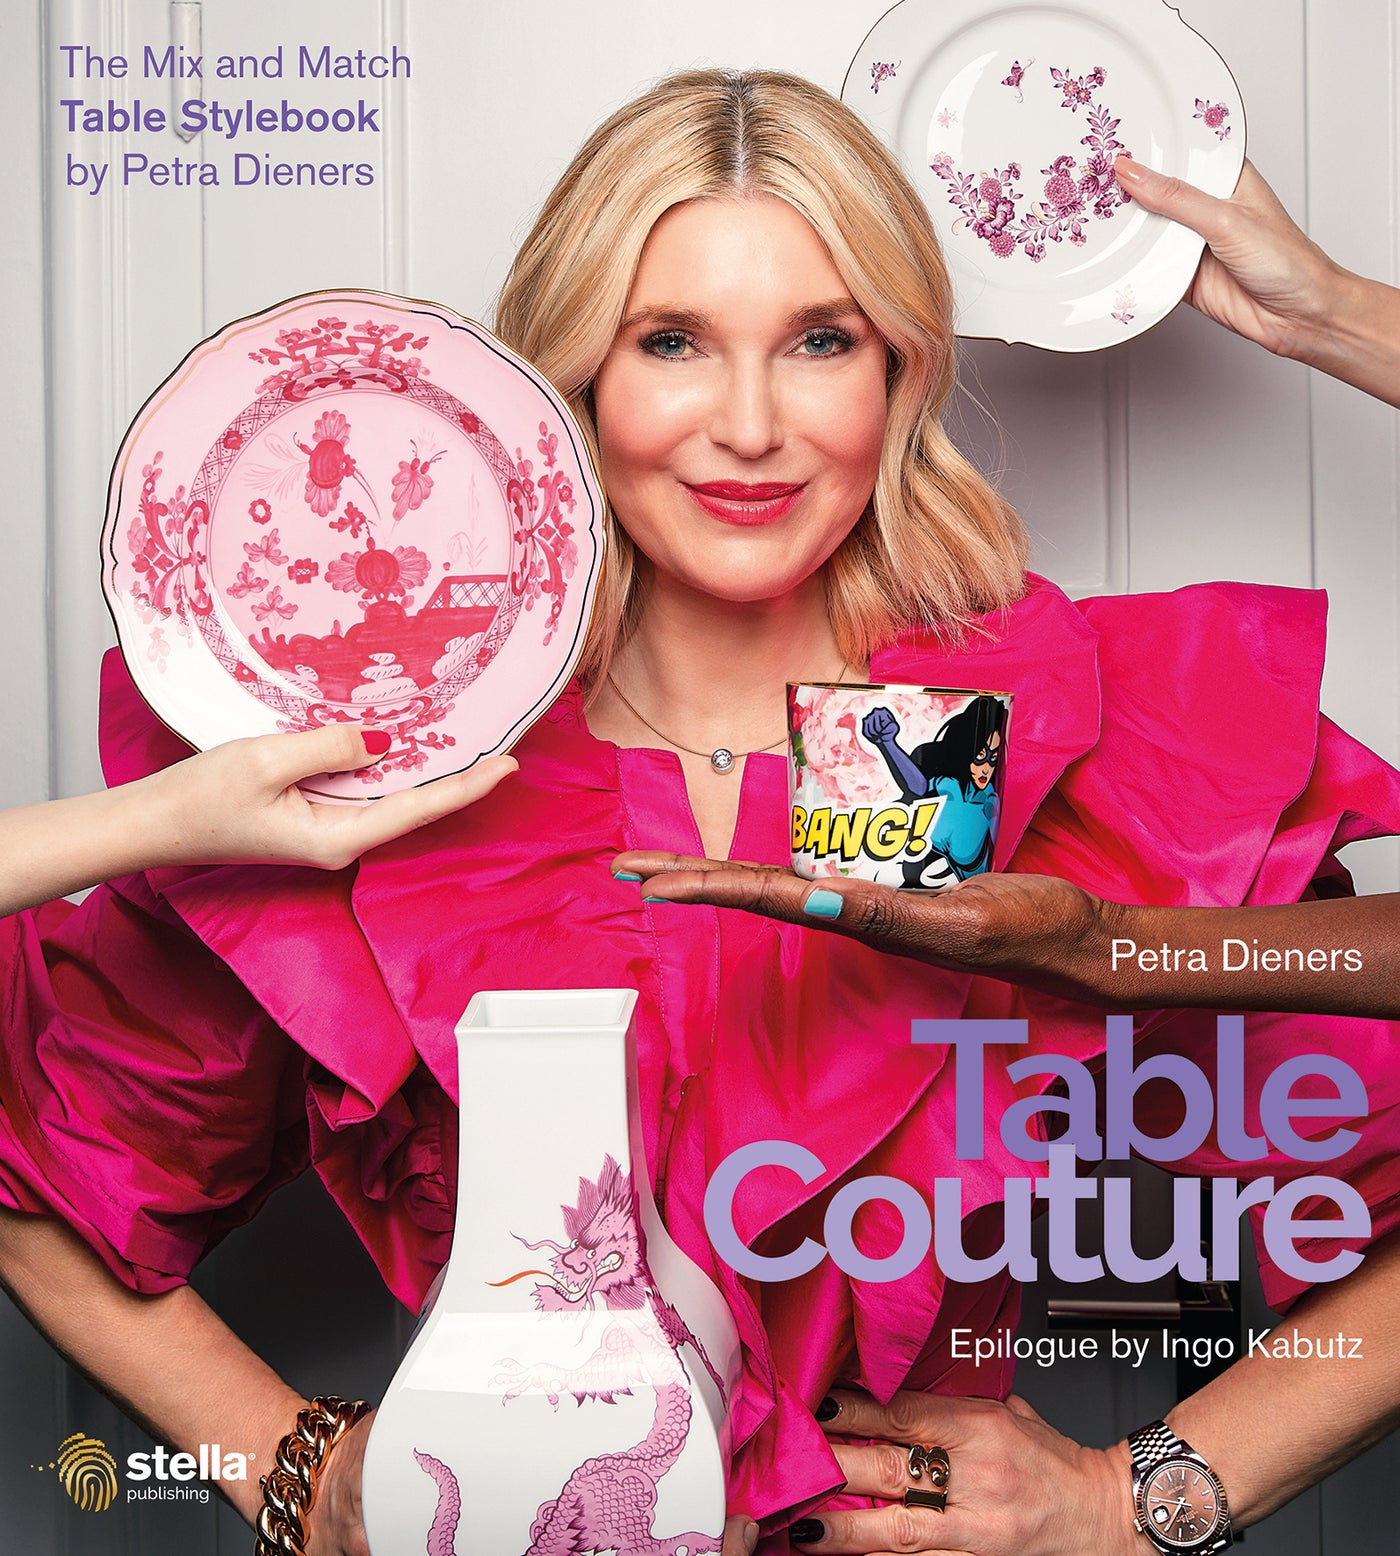 TABLE COUTURE The Mix and Match Table Stylebook by Petra Dieners